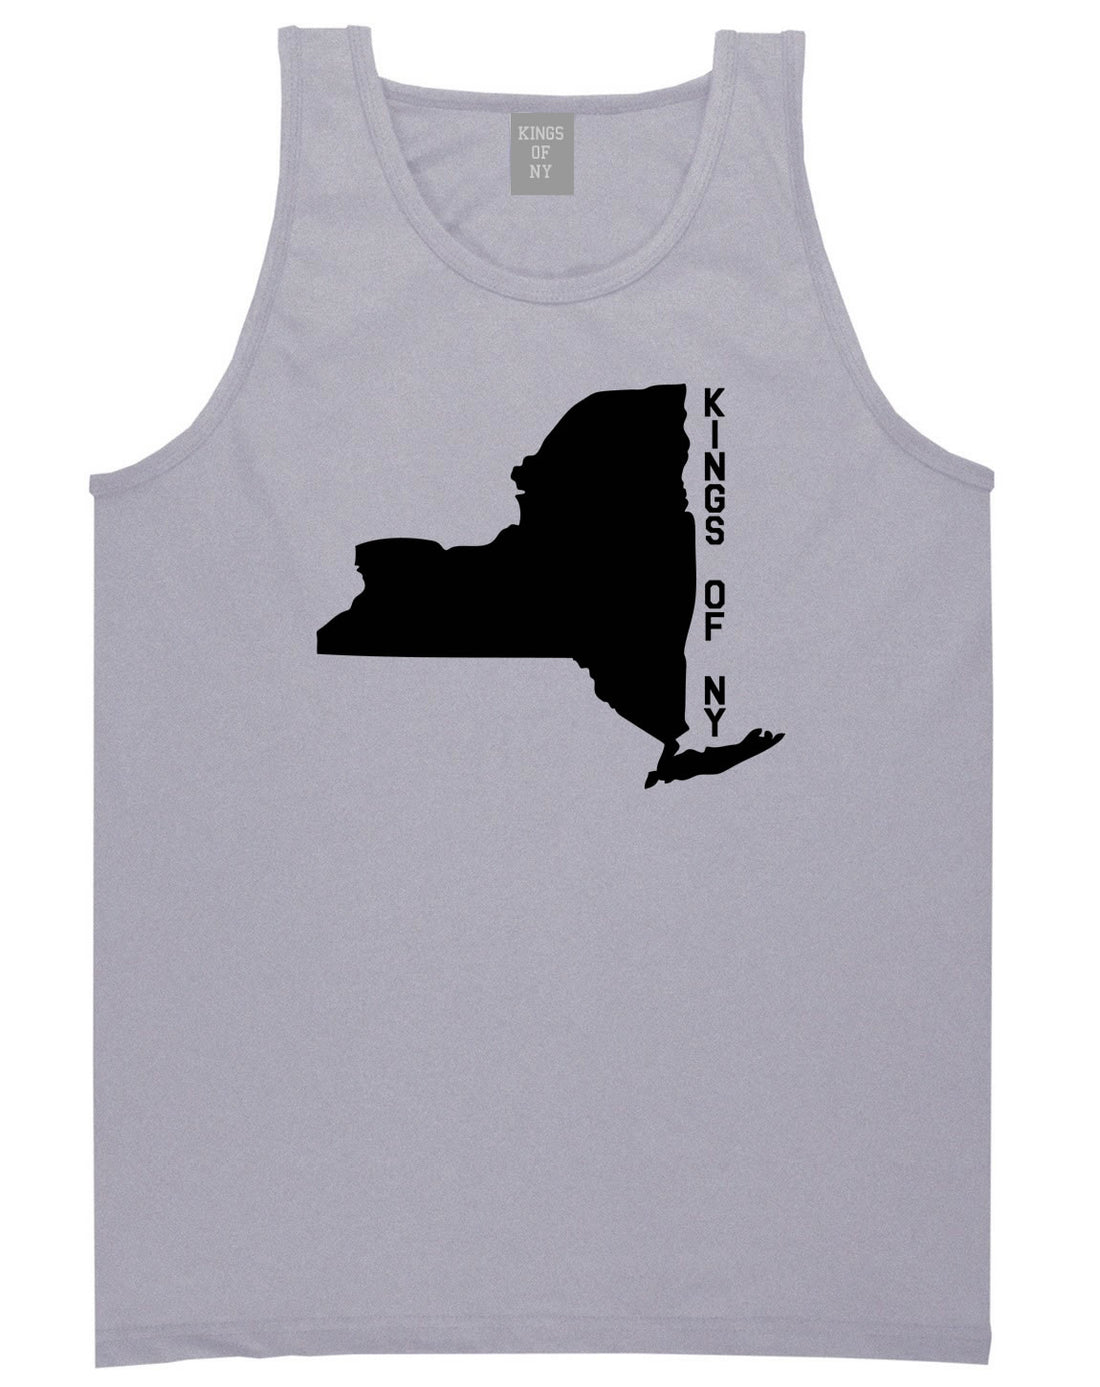 New York State Shape Tank Top in Grey By Kings Of NY